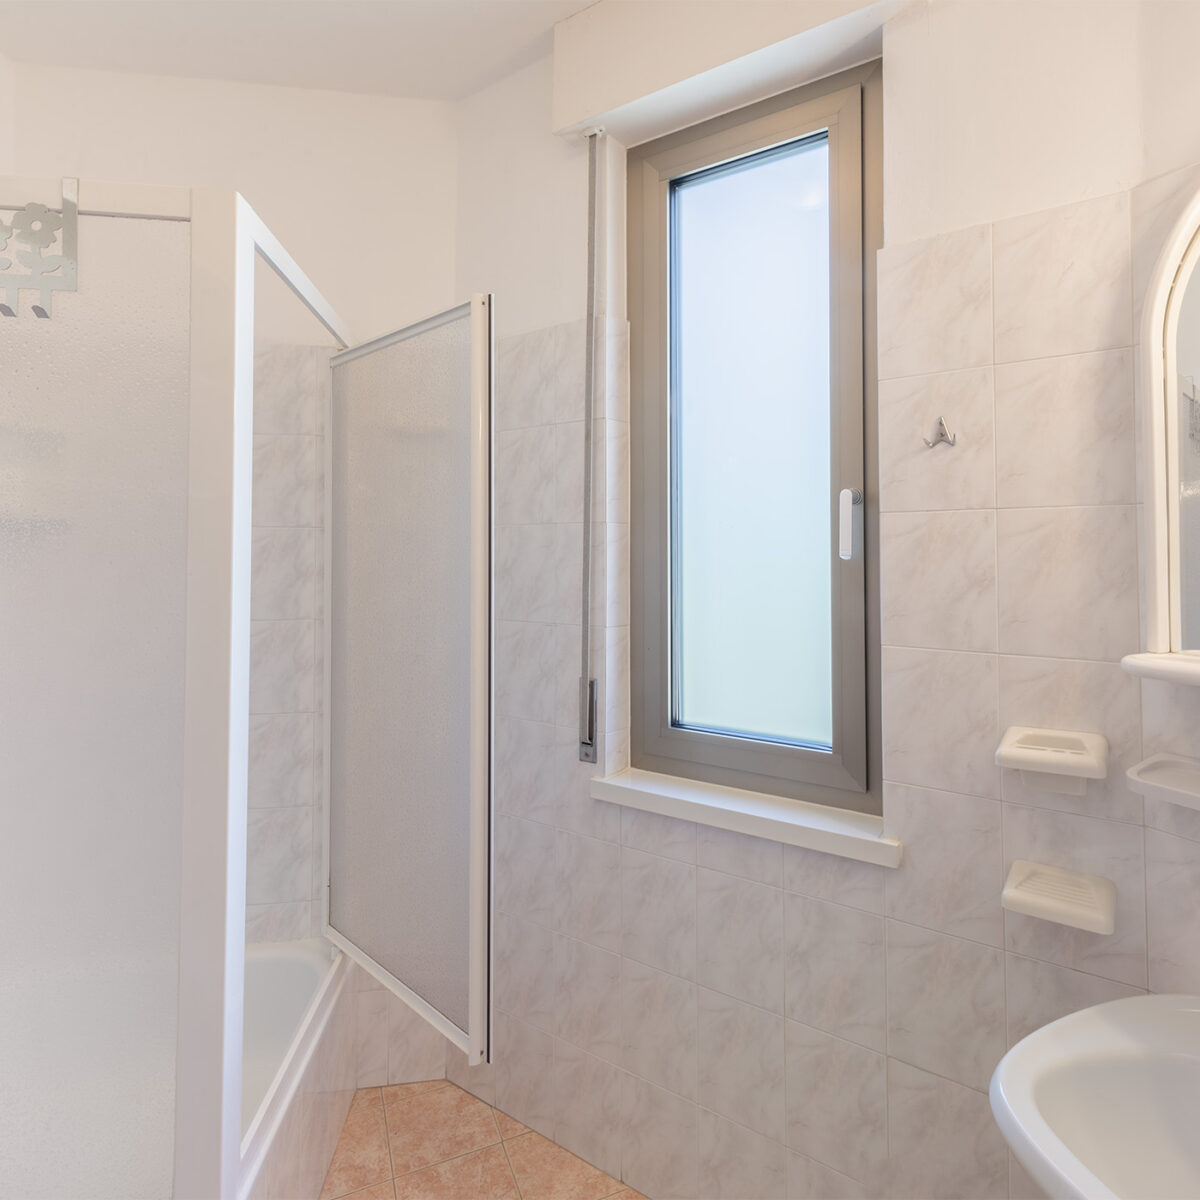 The windowed bathroom is equipped with shower, toilet, bidet